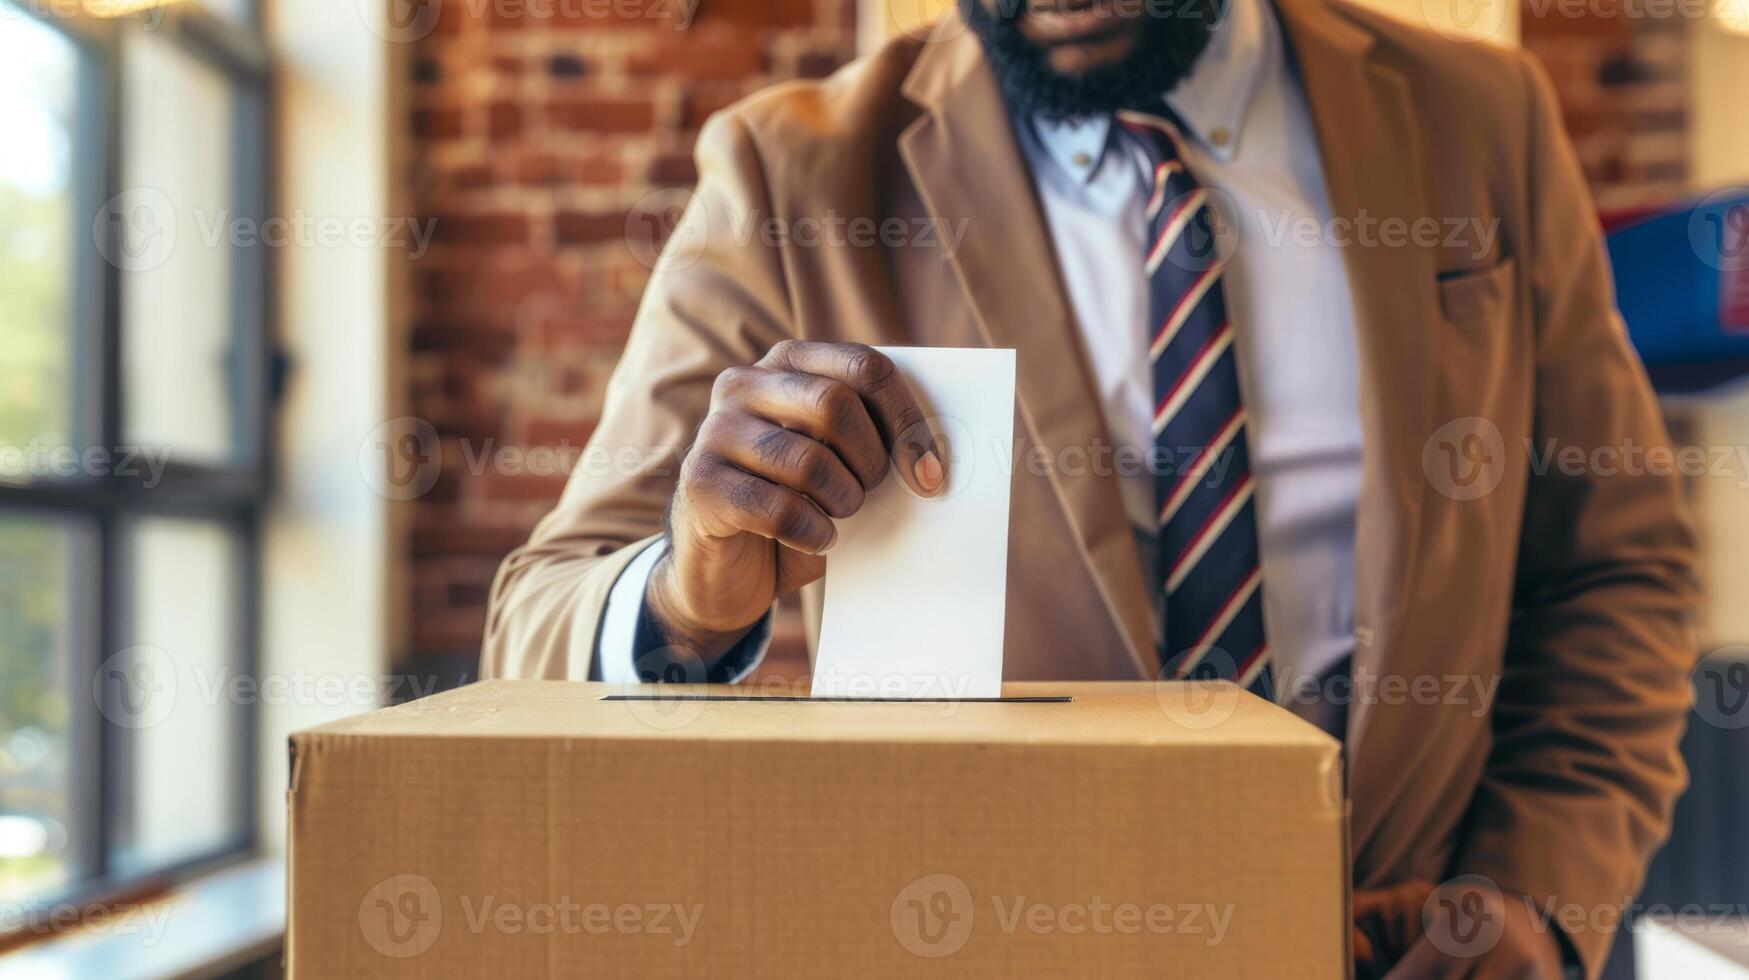 AI generated African American man placing a ballot into a voting box at a polling station. Black male voter. Concept of democracy, elections, civic duty, diversity. American presidential elections. photo